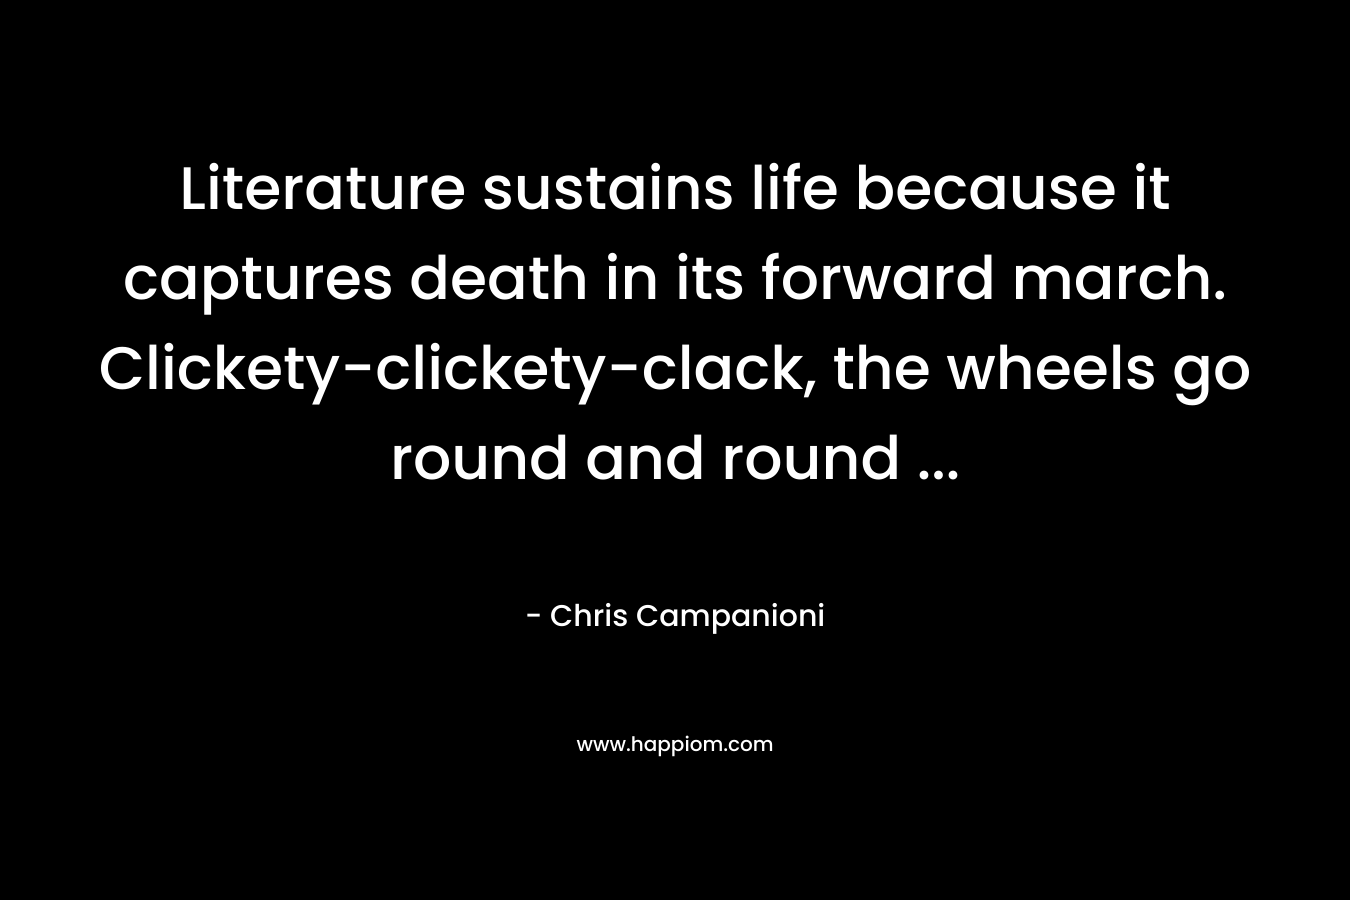 Literature sustains life because it captures death in its forward march. Clickety-clickety-clack, the wheels go round and round ...